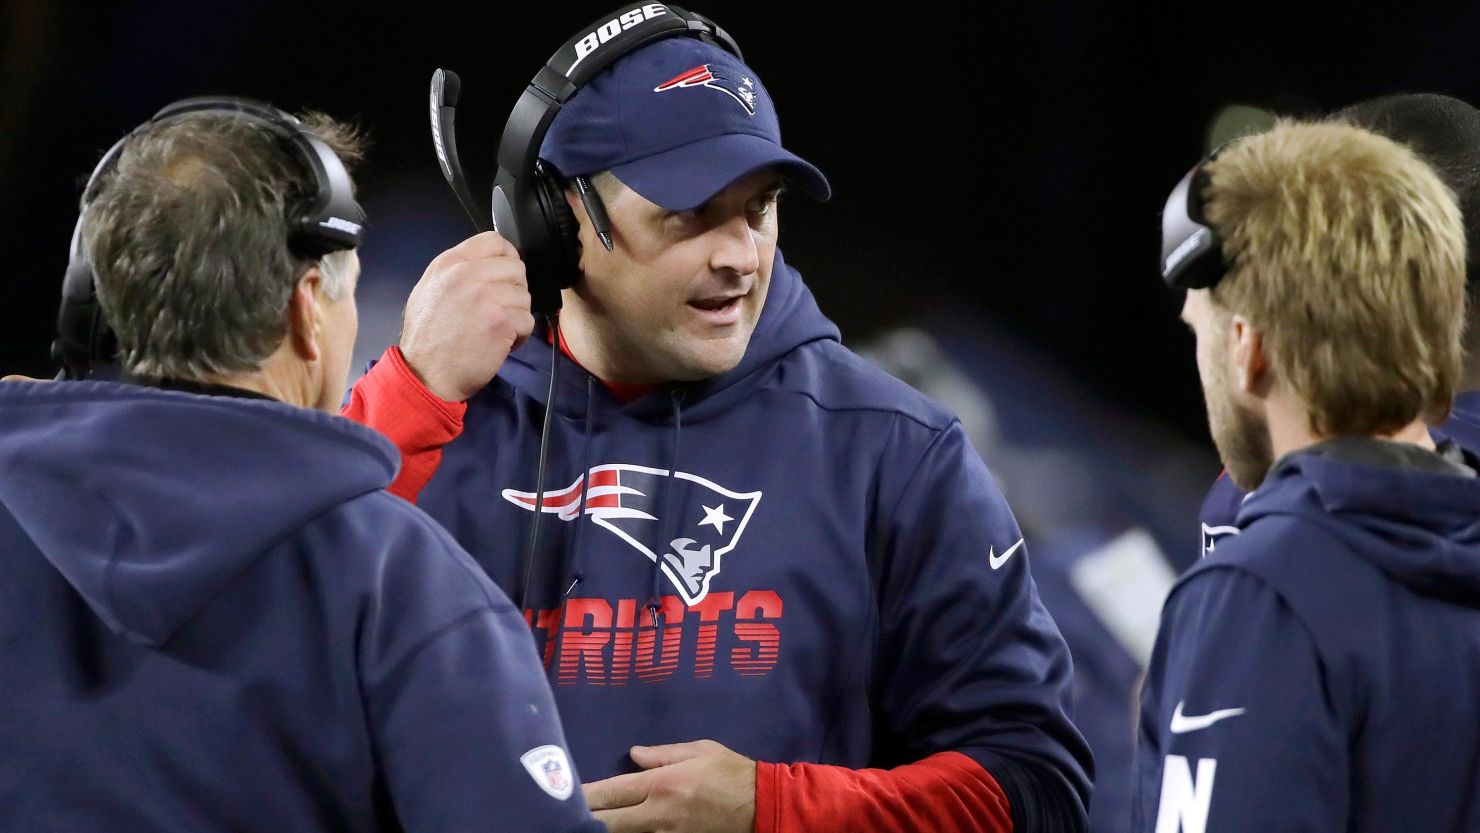 Judge has spent eight seasons on the staff of the New England Patriots.